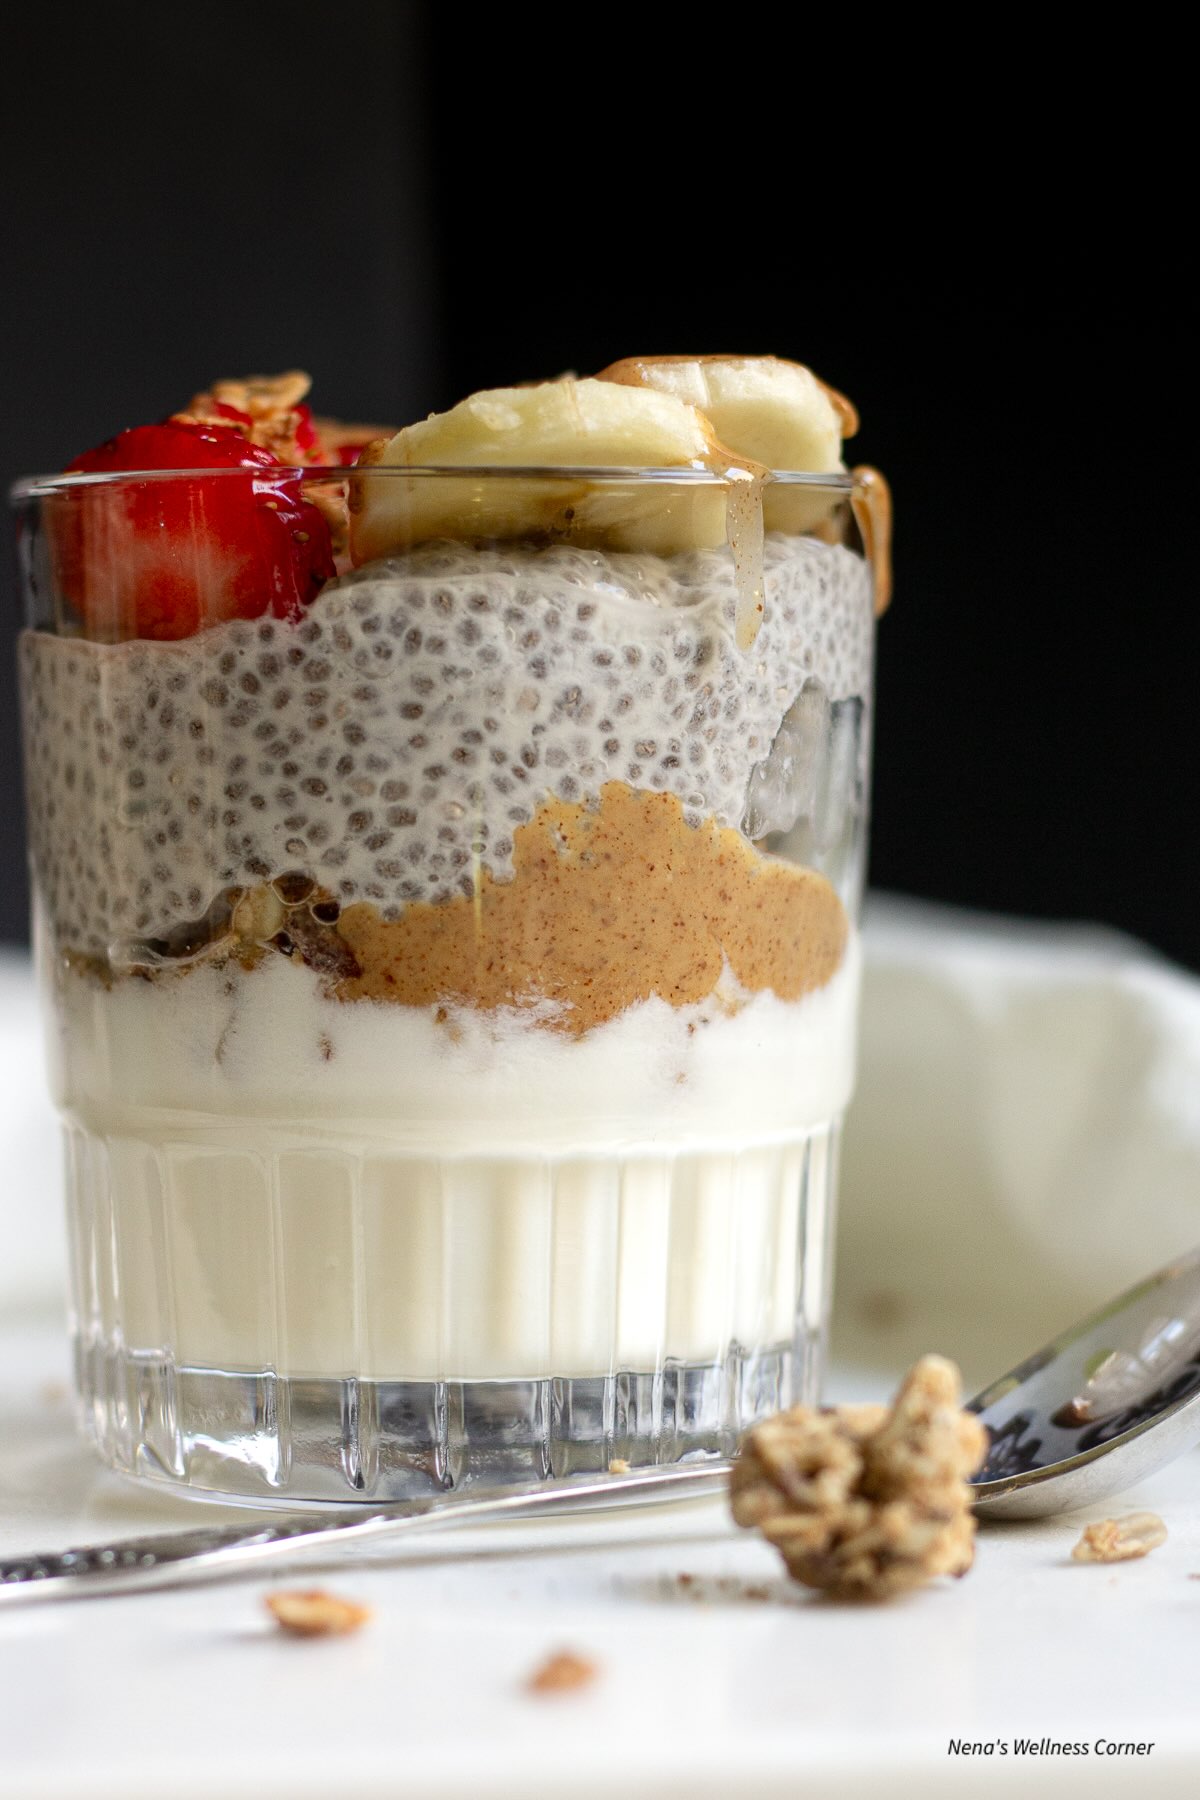 Chia Yogurt Parfait served in a glass and topped with granola and fruit